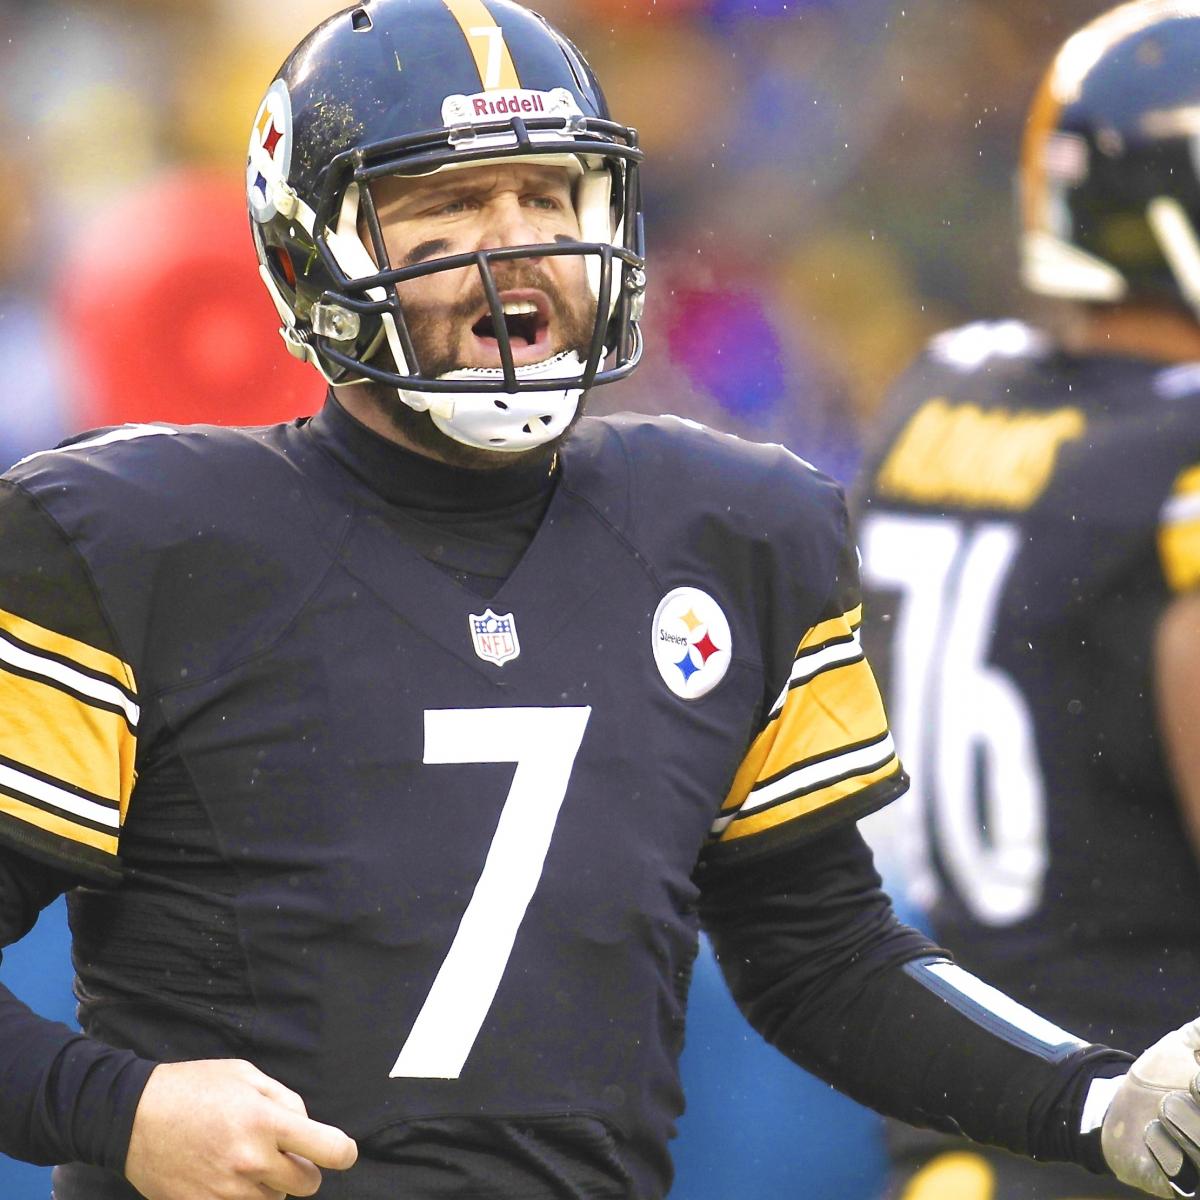 Who was the quarterback for the steelers before roethlisberger information